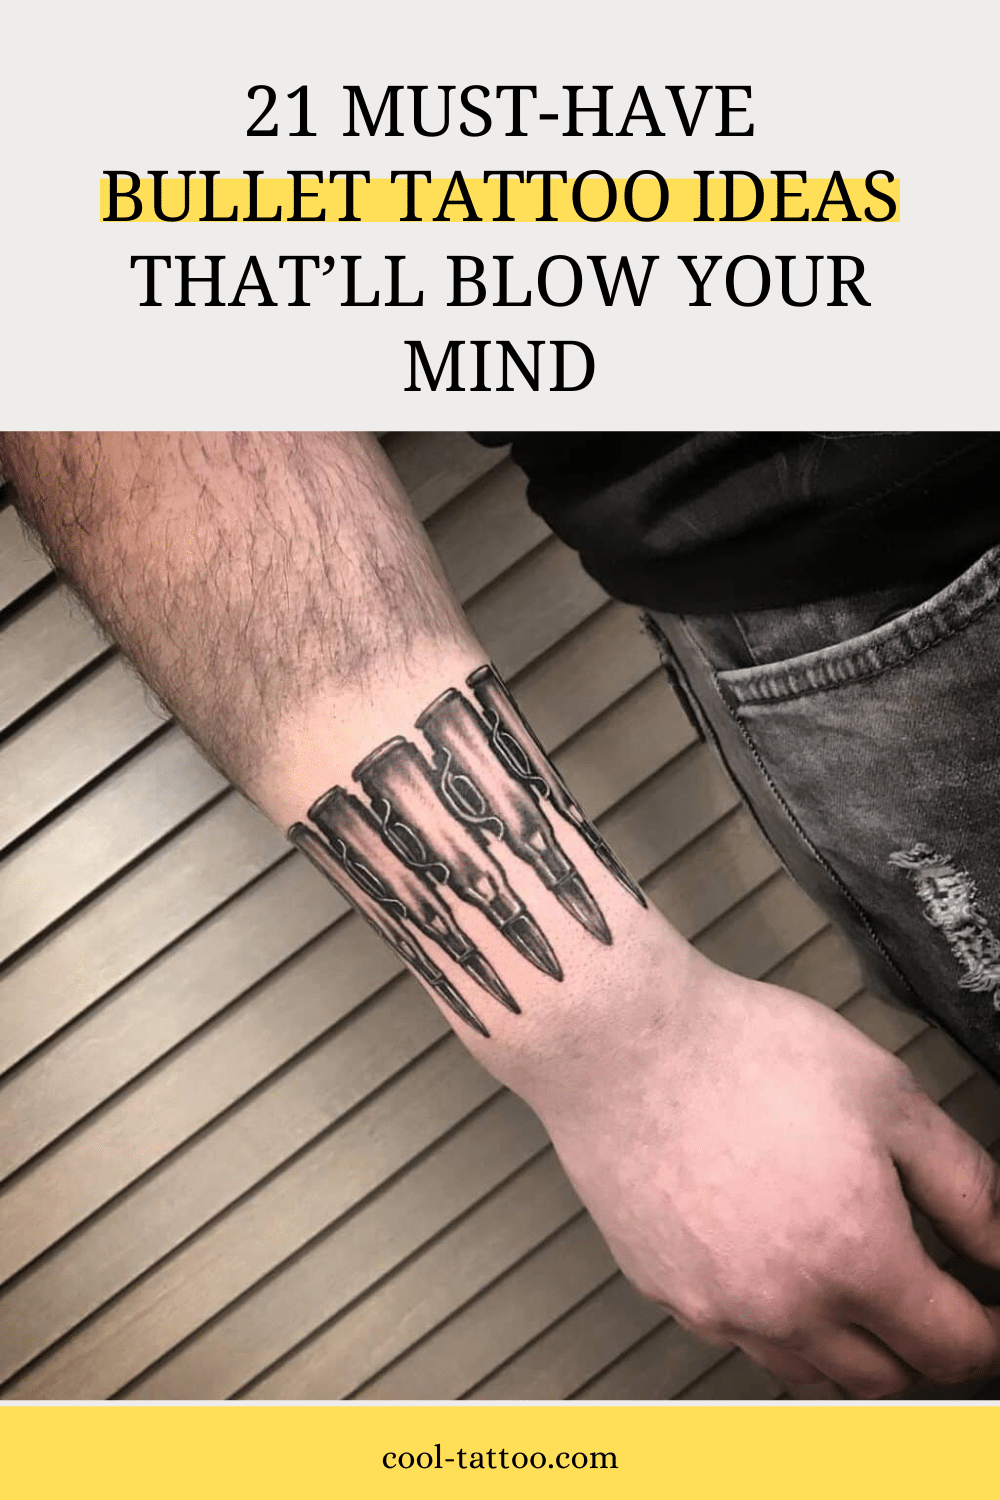 21 Must-Have Bullet Tattoo Ideas That’ll Blow Your Mind